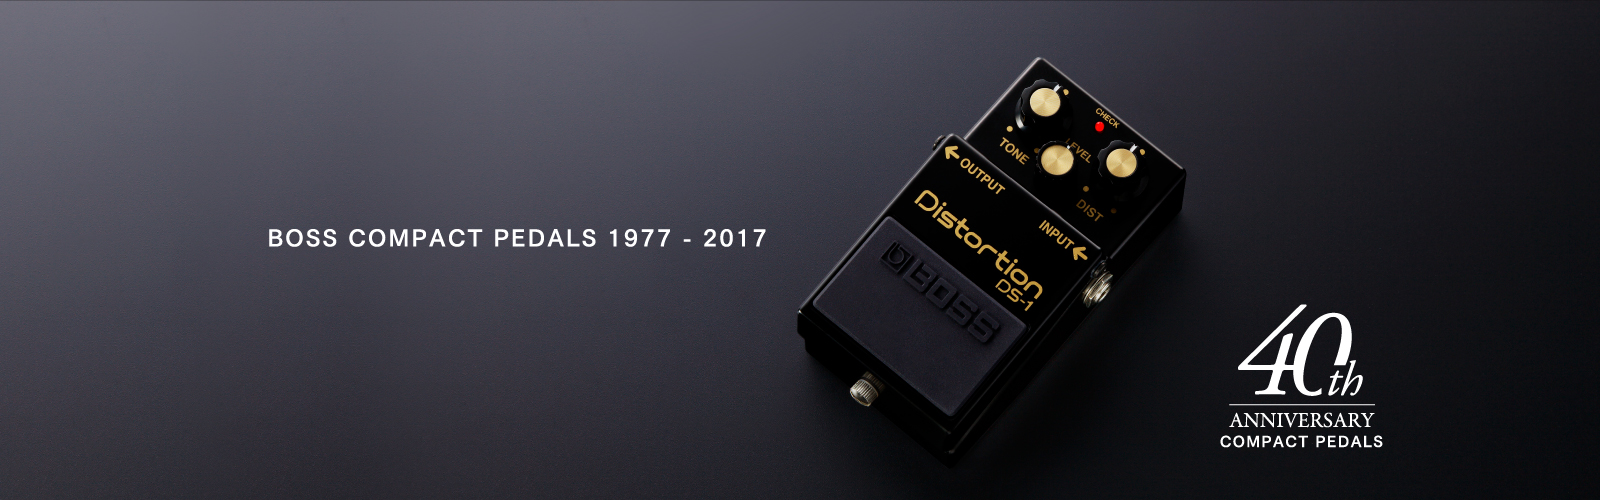 BOSS COMPACT PEDALS 1977 - 2017